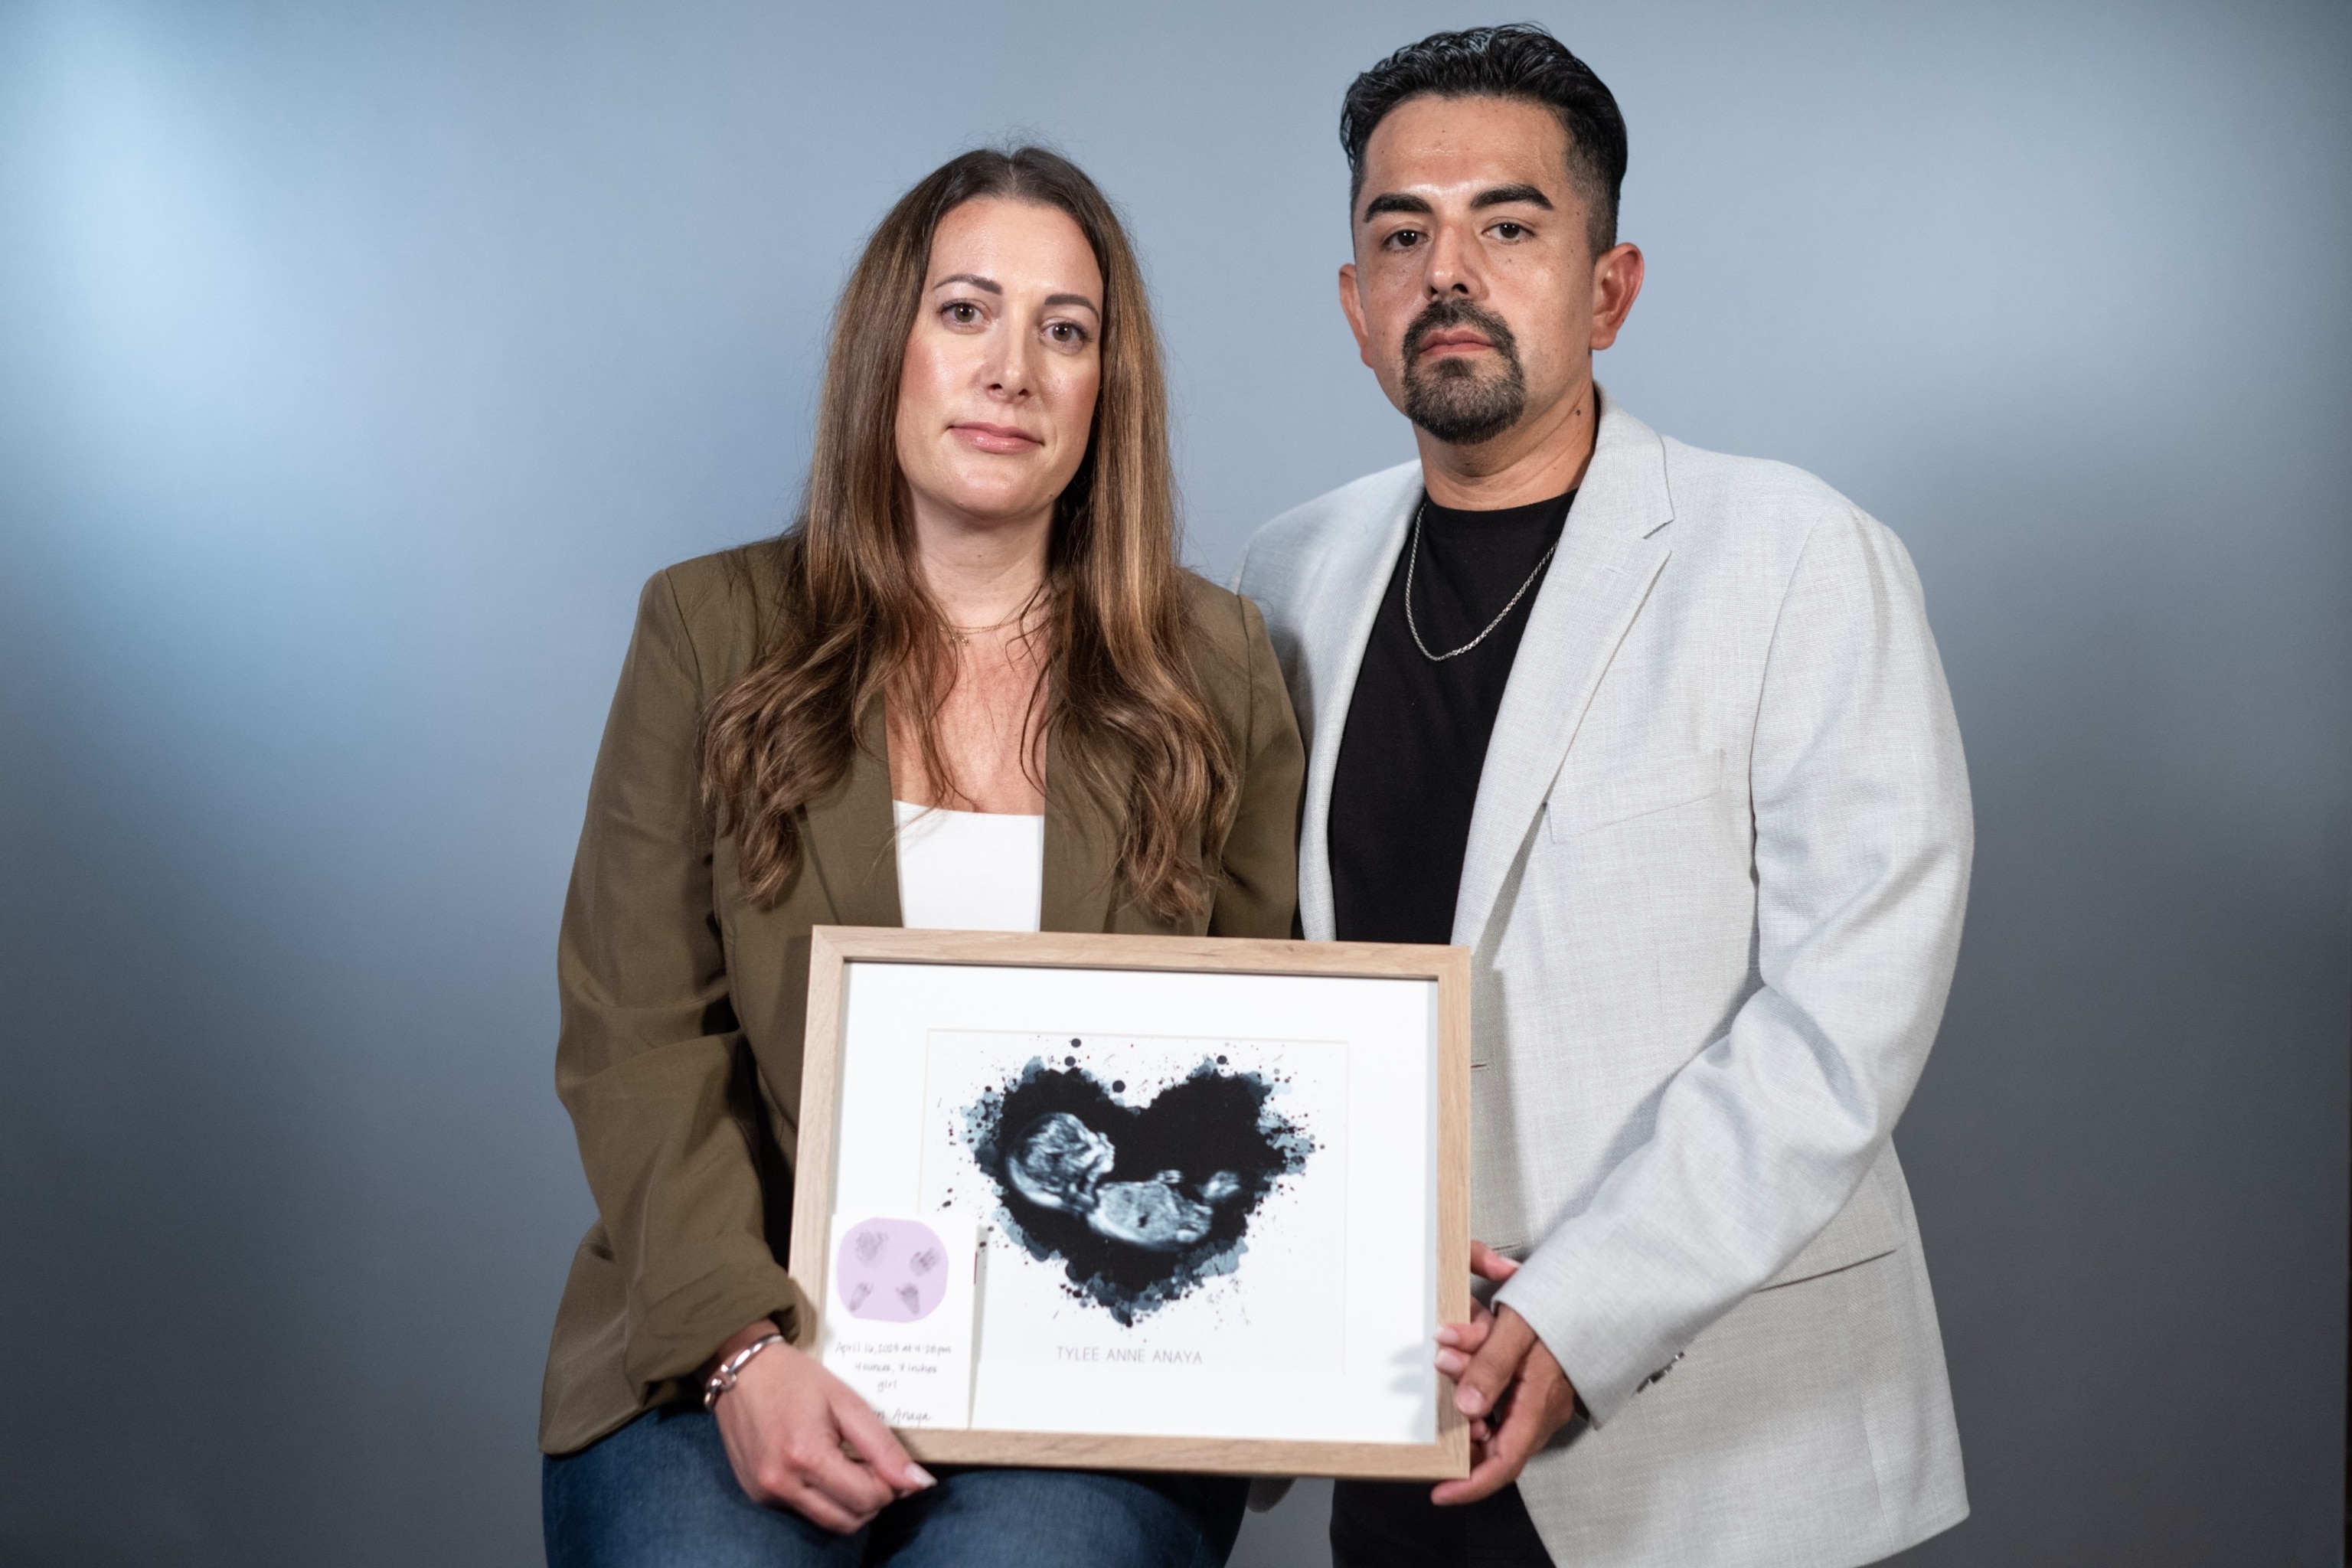 PHOTO: Kristen Anaya with her husband Stephen, had her water break when she was four months pregnant. Despite there being no chance that the baby could survive, Anaya was told she had to get very sick before doctors could intervene. She went into sepsis.